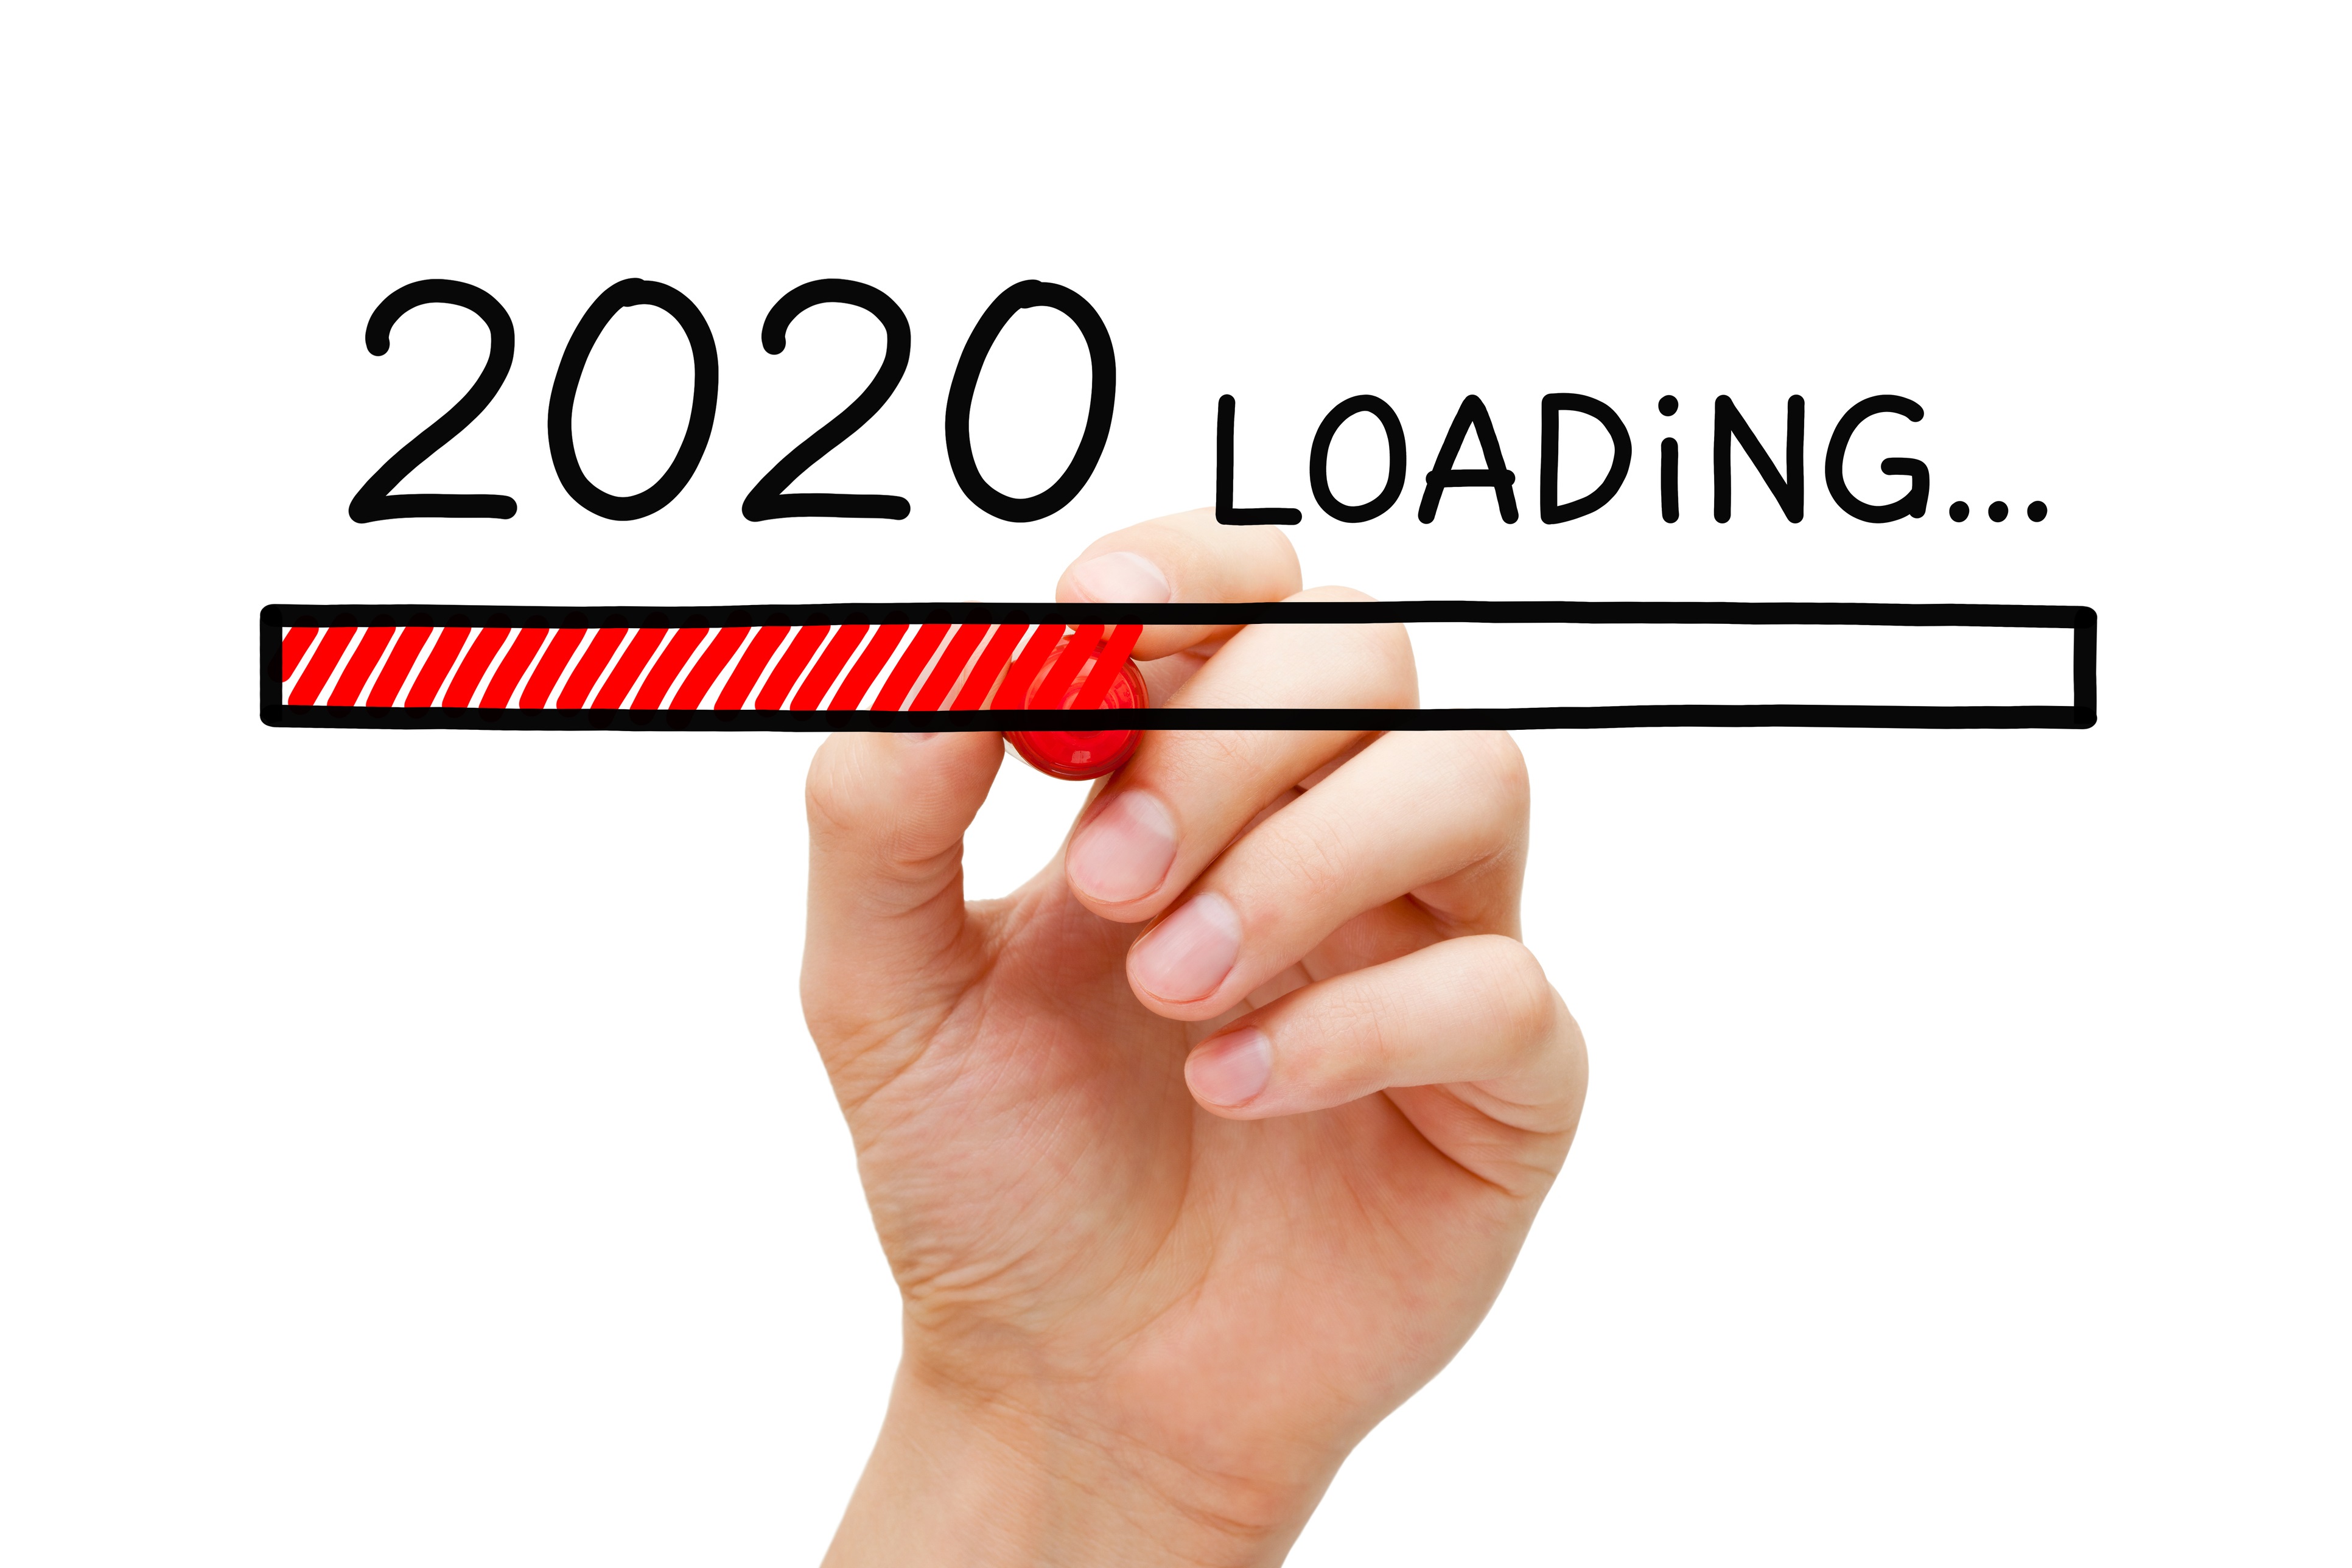 New Year 2020 Loading Bar Concept